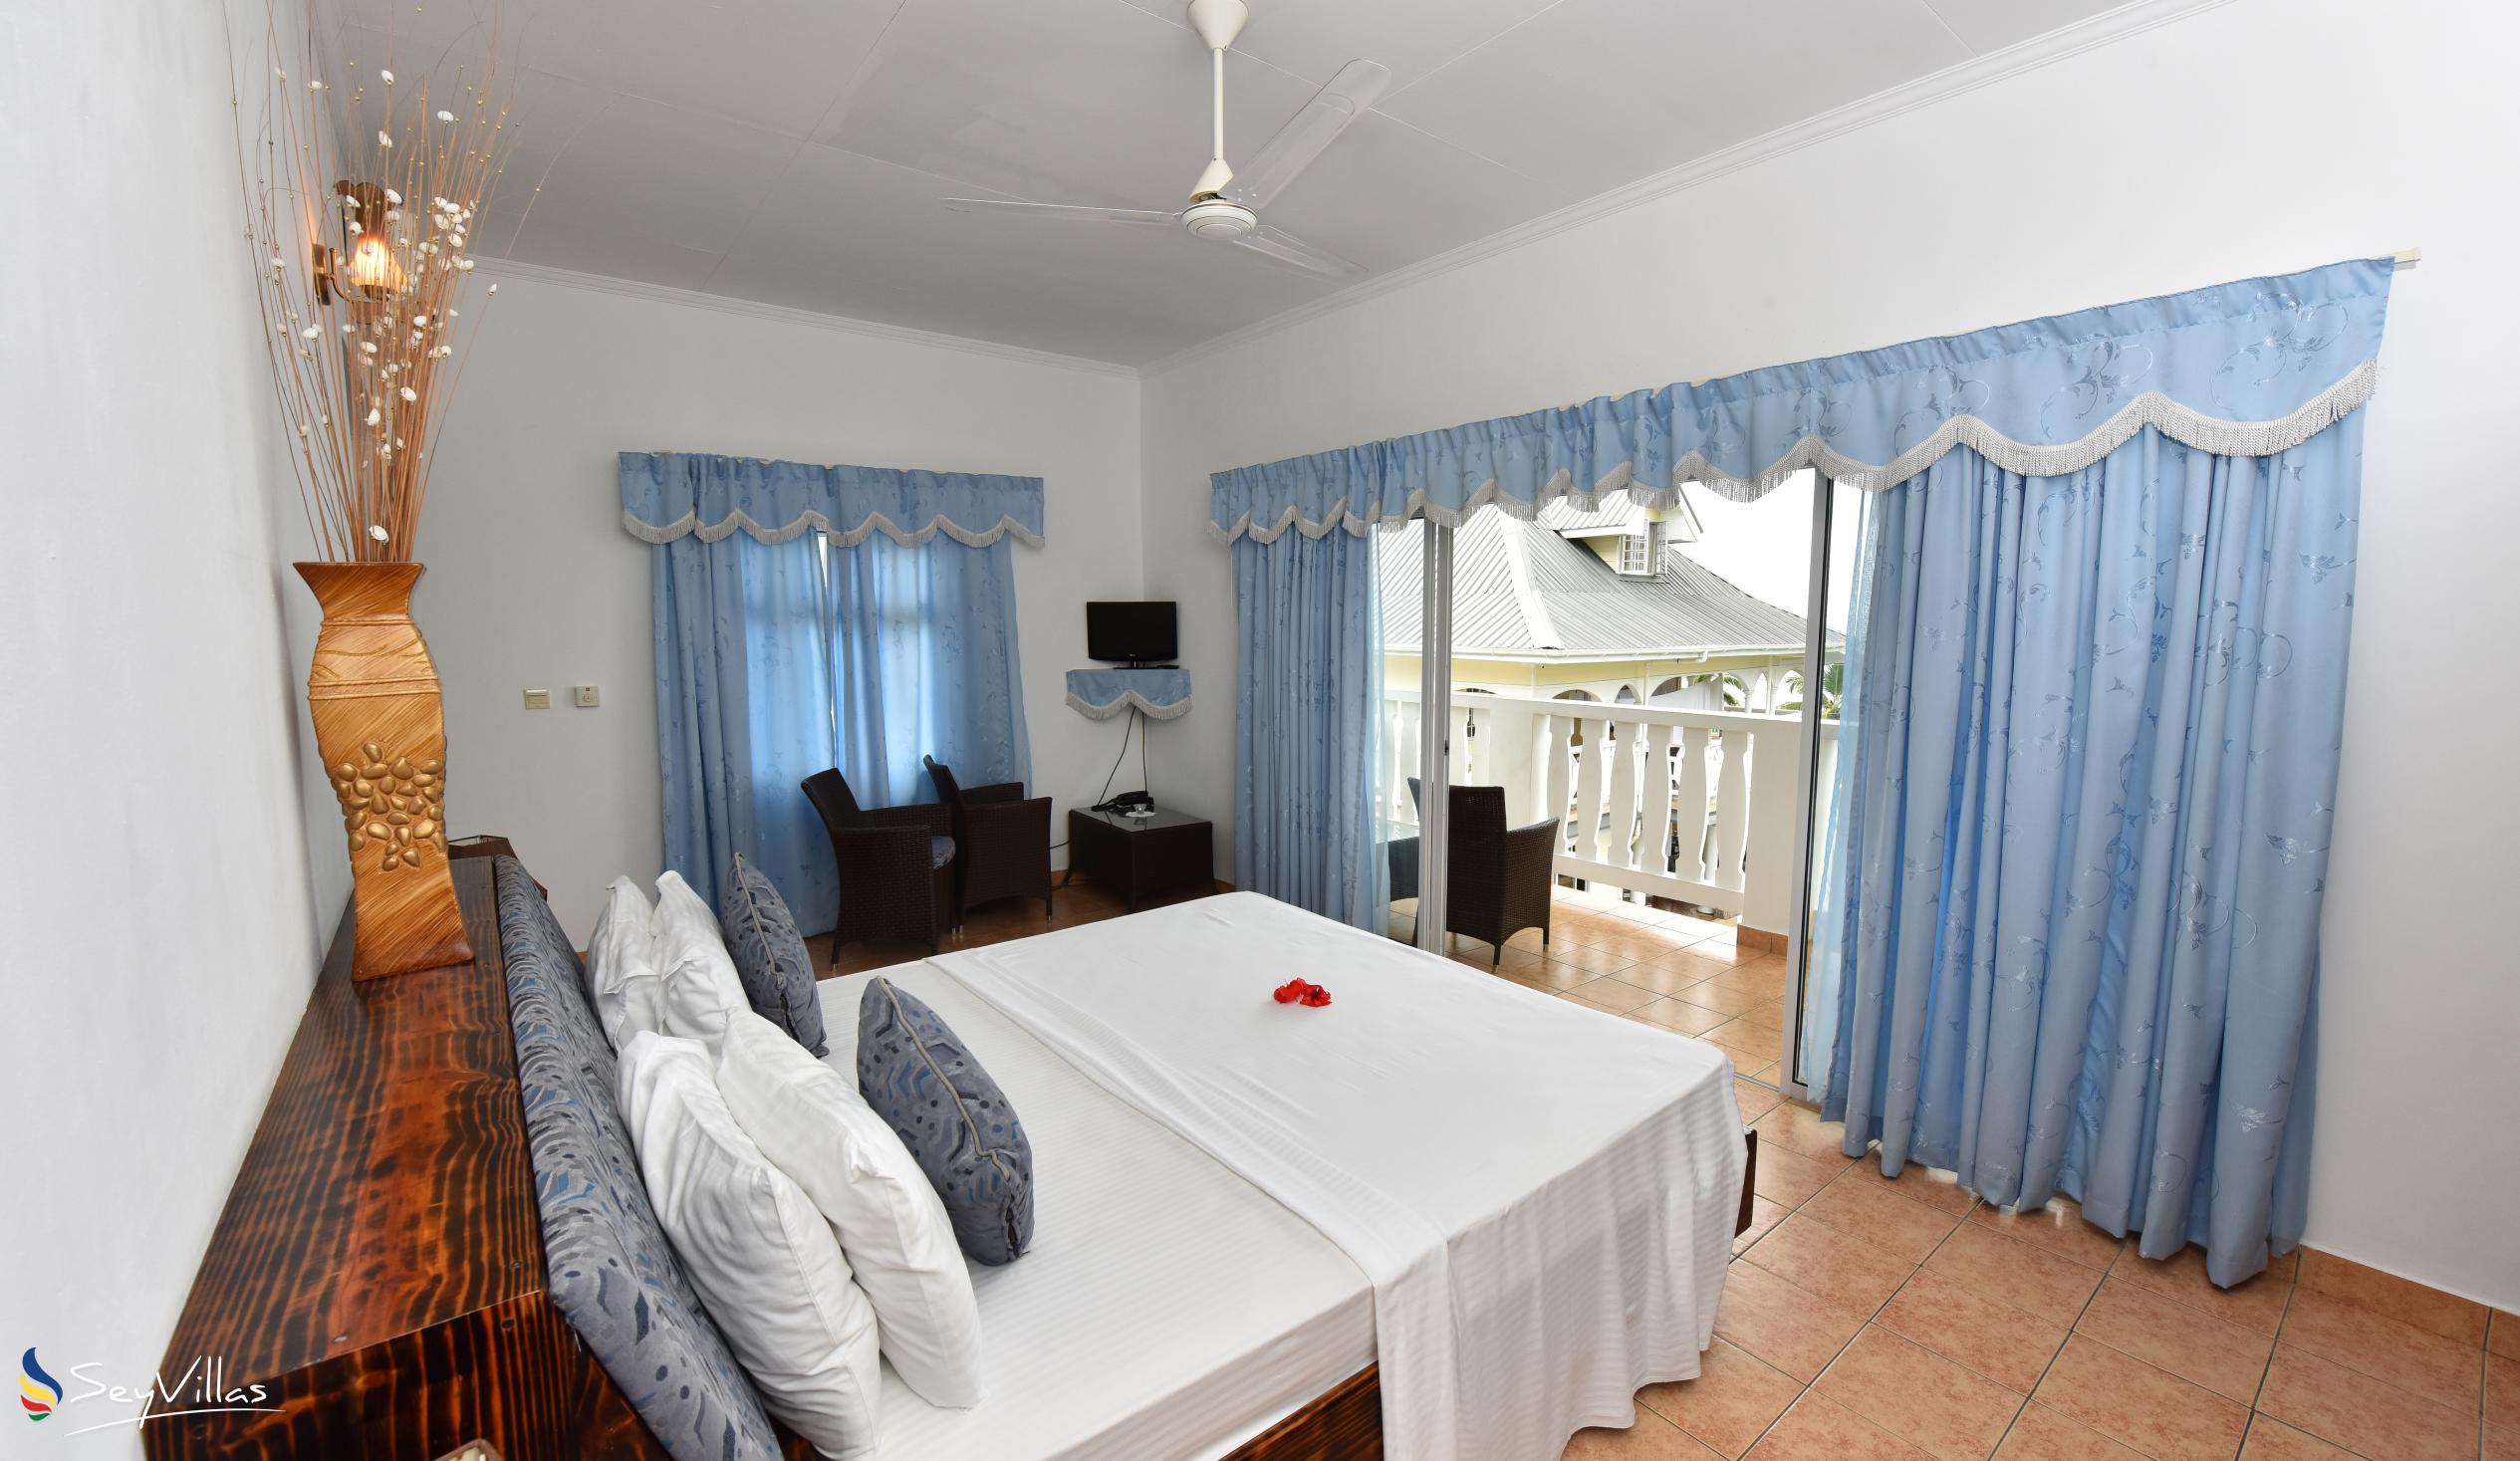 Photo 9: The Diver's Lodge - Standard Room (First Floor) - Mahé (Seychelles)